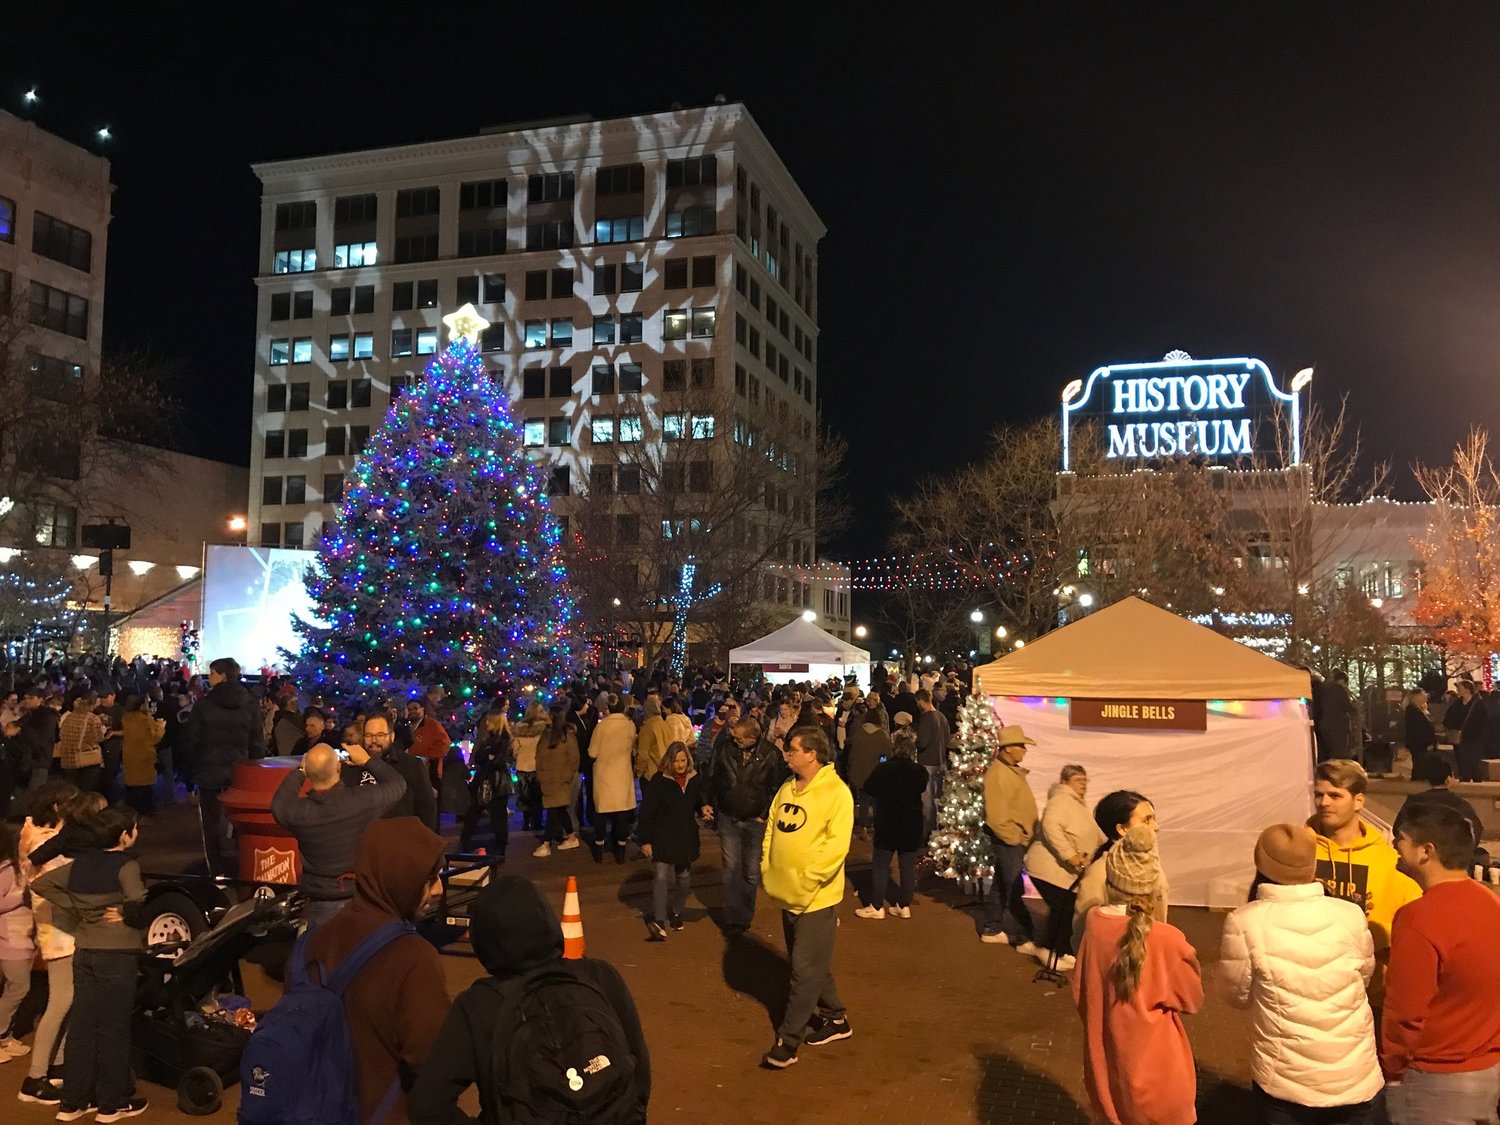 The event will take place on the square, where the annual Christmas tree was installed last month.